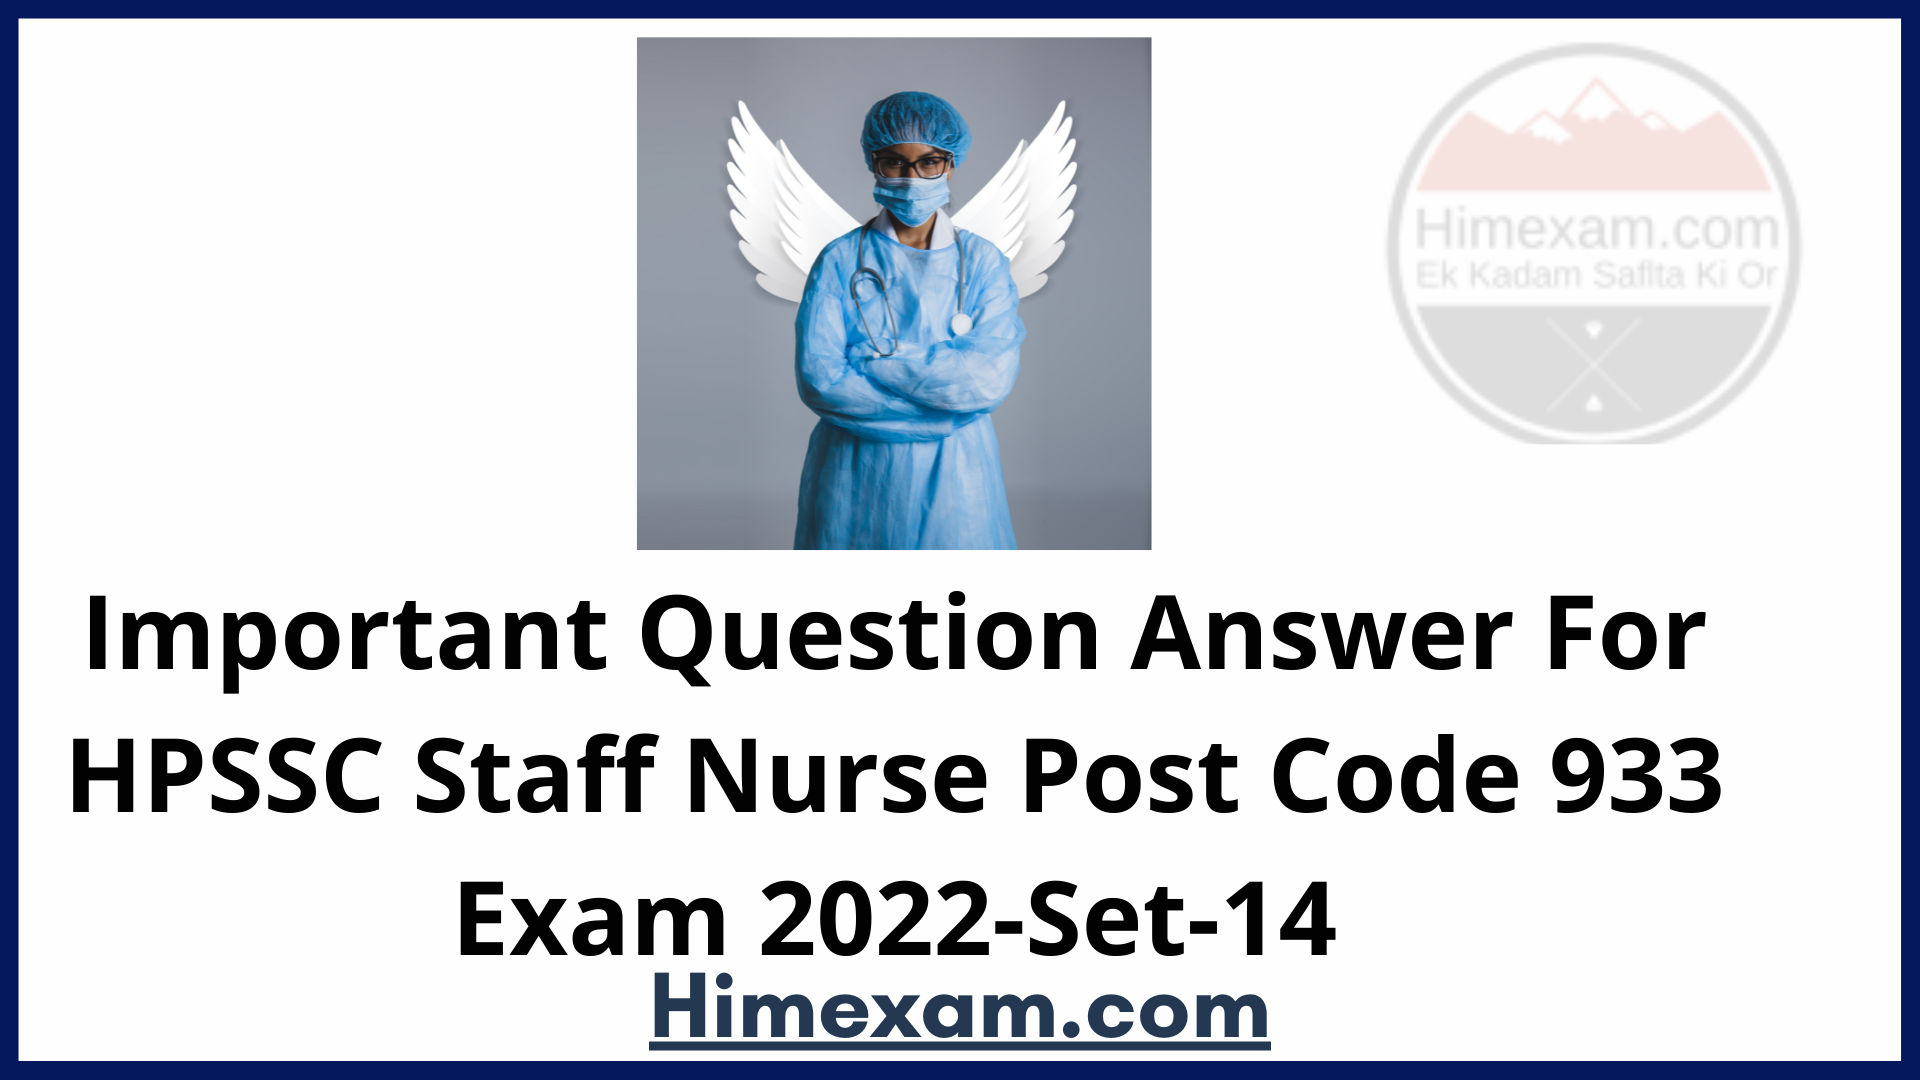 Important Question Answer  For HPSSC Staff Nurse Post Code 933 Exam 2022-Set-14